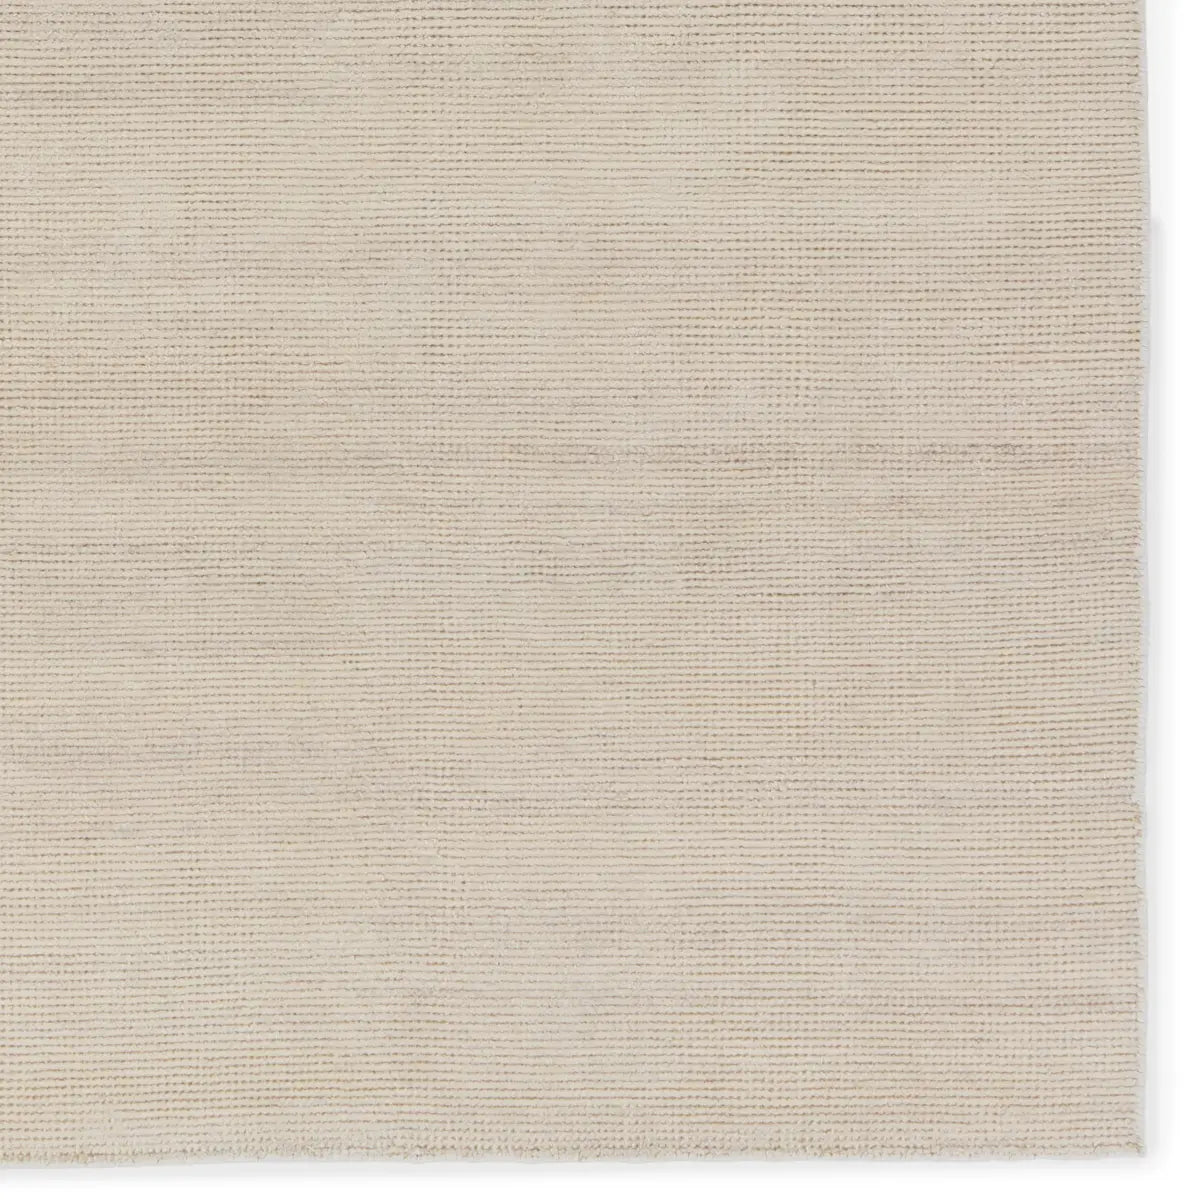 The eco-friendly Rebecca Light Gray Area Rug by Jaipur Living delivers a fresh accent to patios, kitchens, and dining rooms with its ultra-durable PET yarn hand-woven construction. The cream colorway with hints of brown lends a modern and sleek tone to any home.